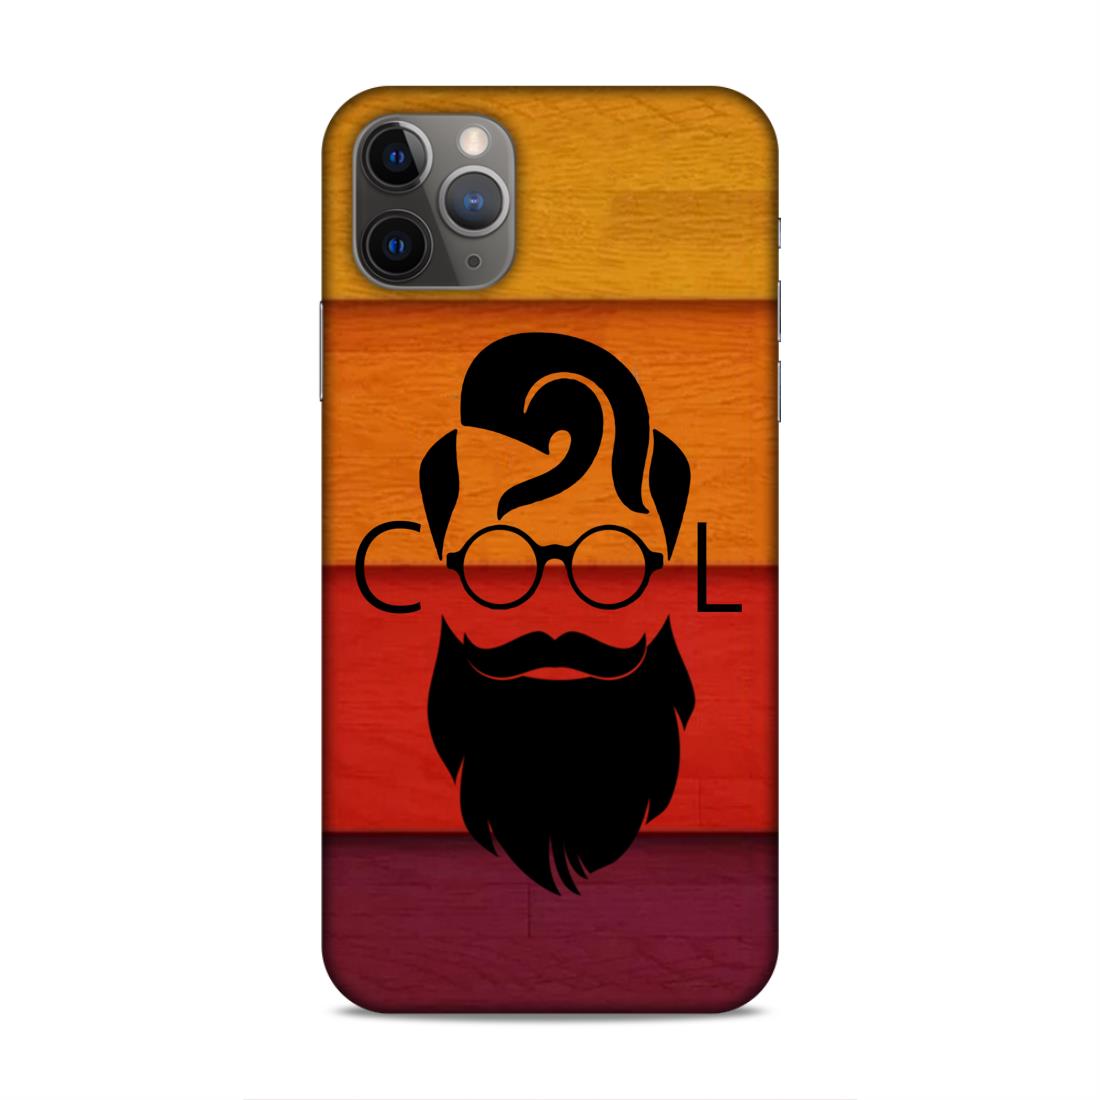 Cool Beard Man Hard Back Case For Apple iPhone 11 Pro Max